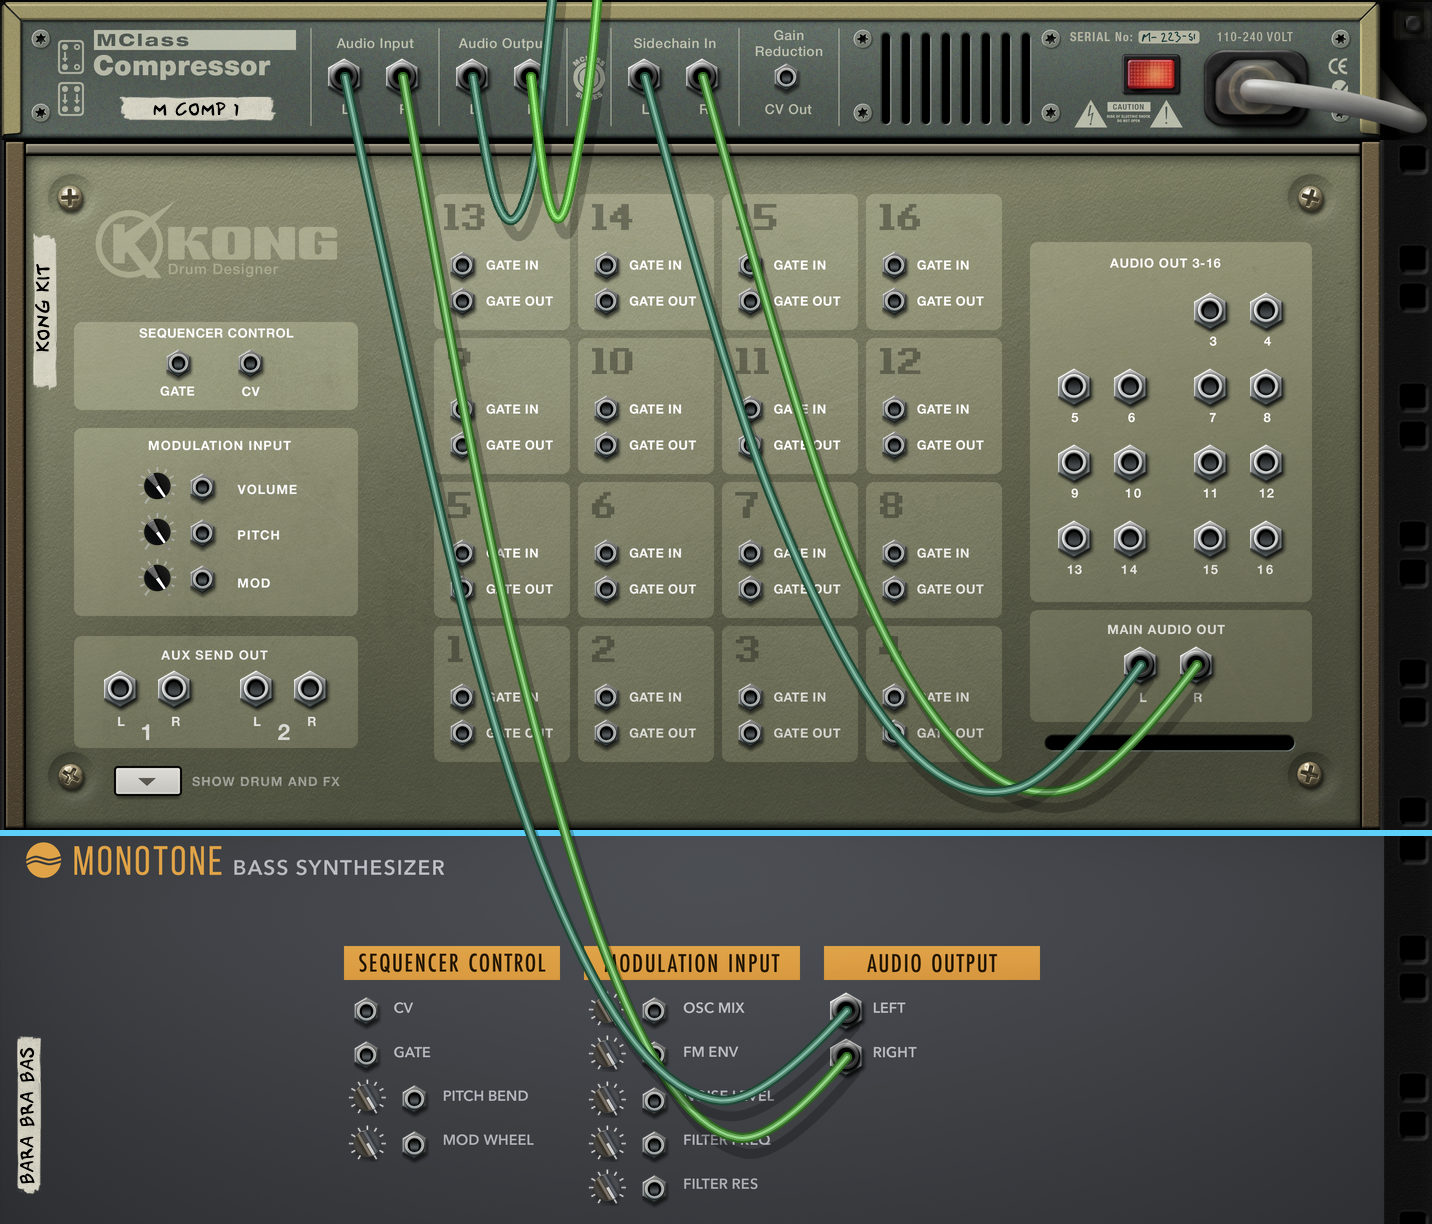 Sidechain compression requires patience